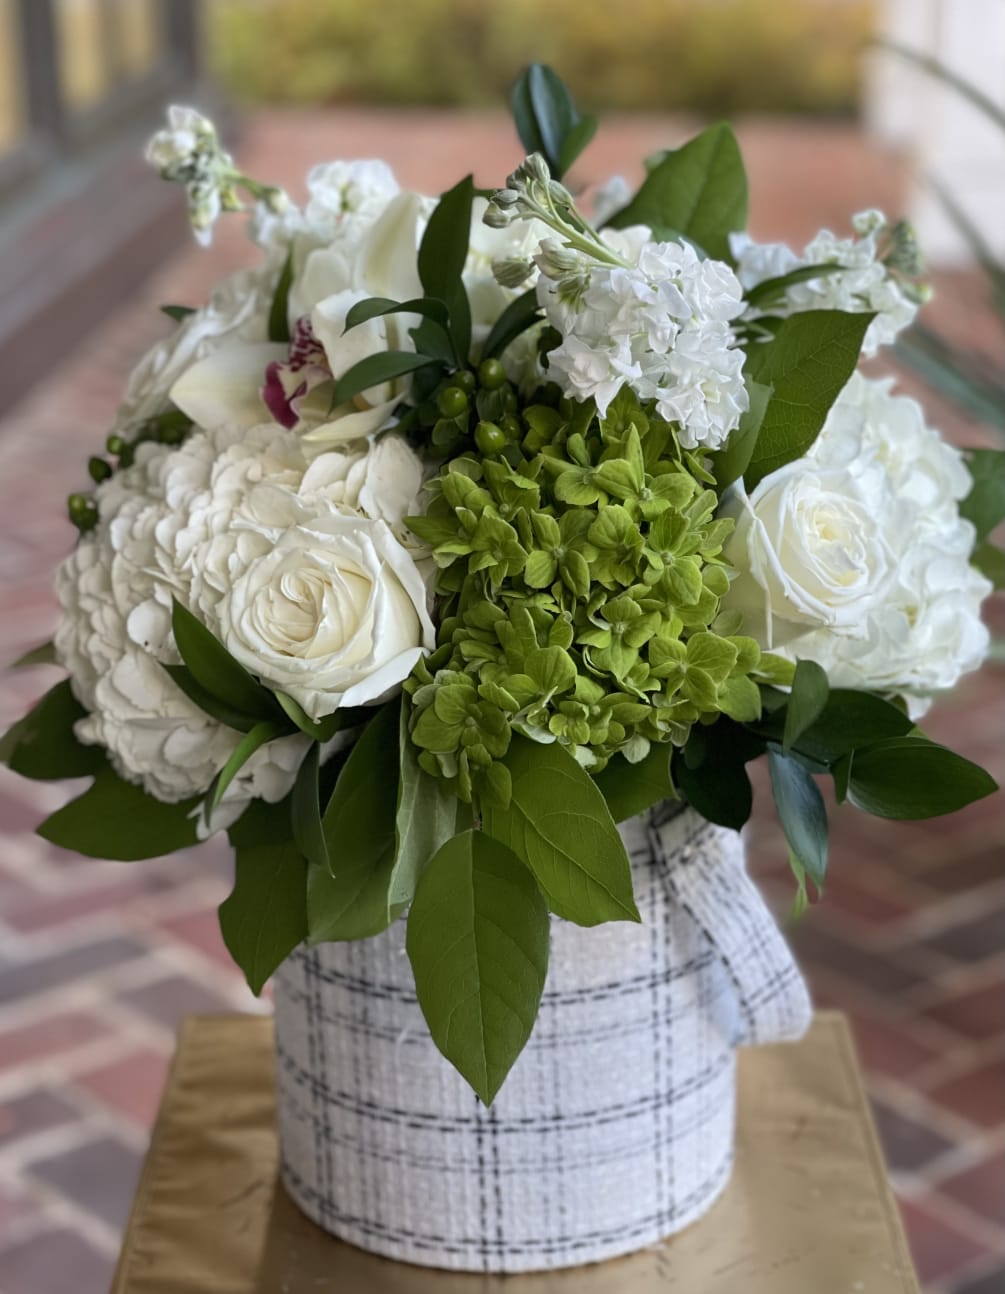 Same day, tax free hand delivery. This arrangement comes in a glass